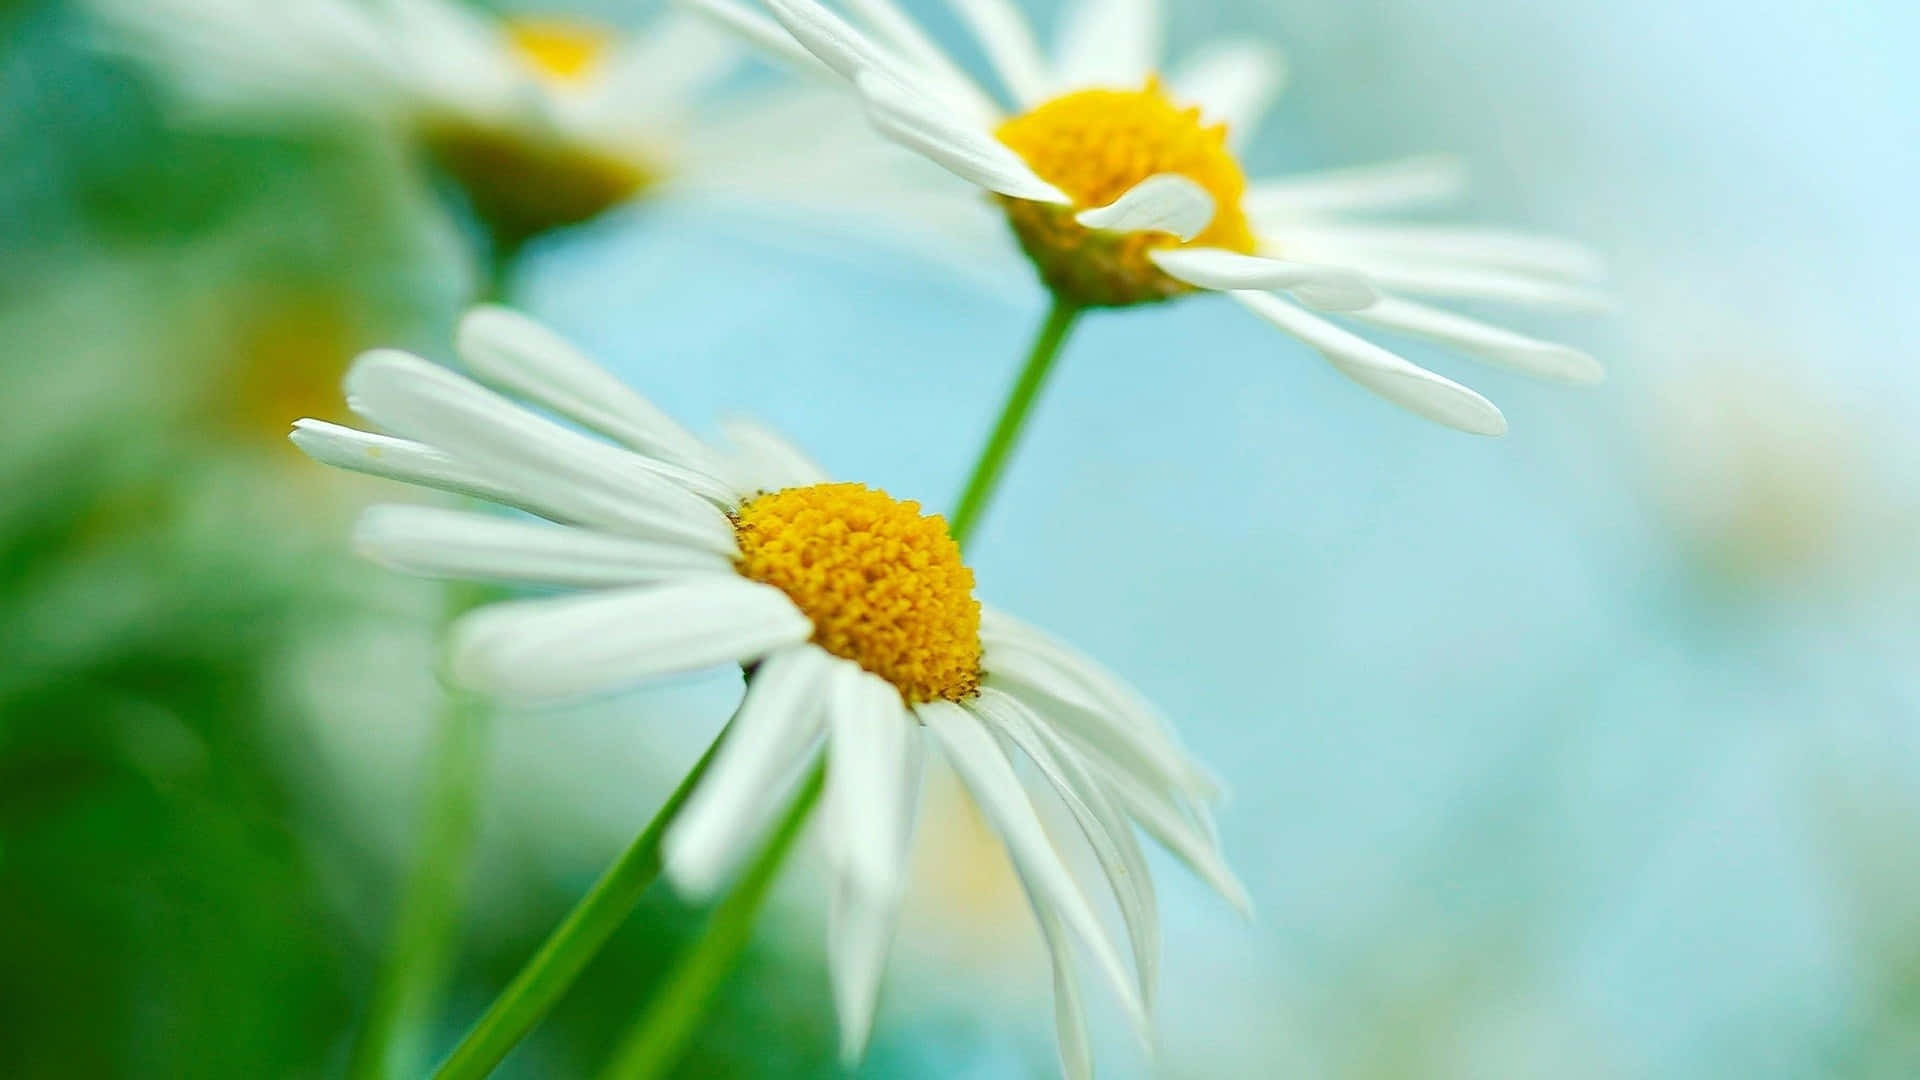 "Brighten Your Day with a Daisy"